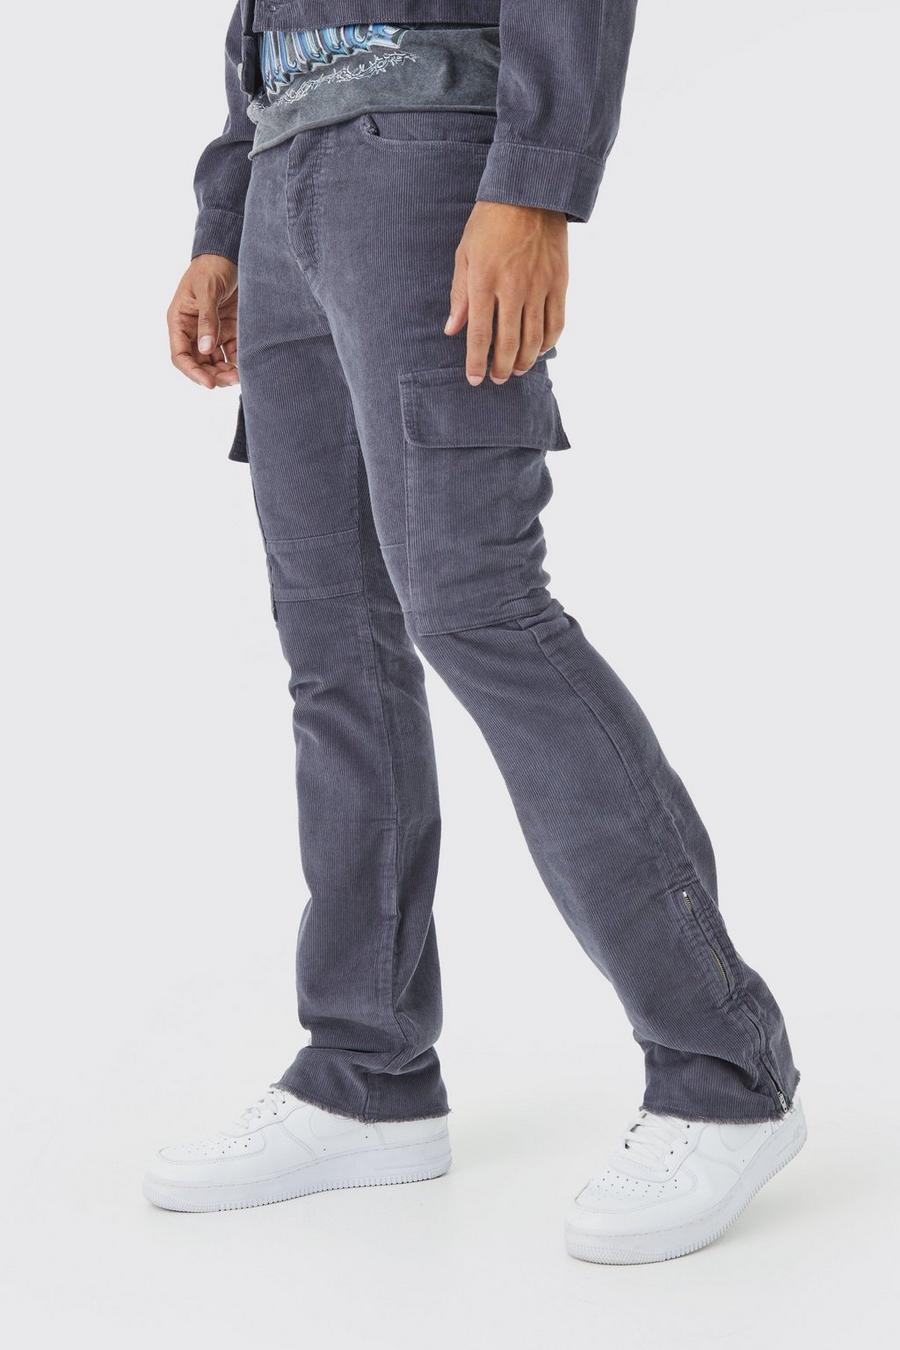 Charcoal grey Fixed Waist Slim Flare Zip Gusset Cord Cargo Trouser